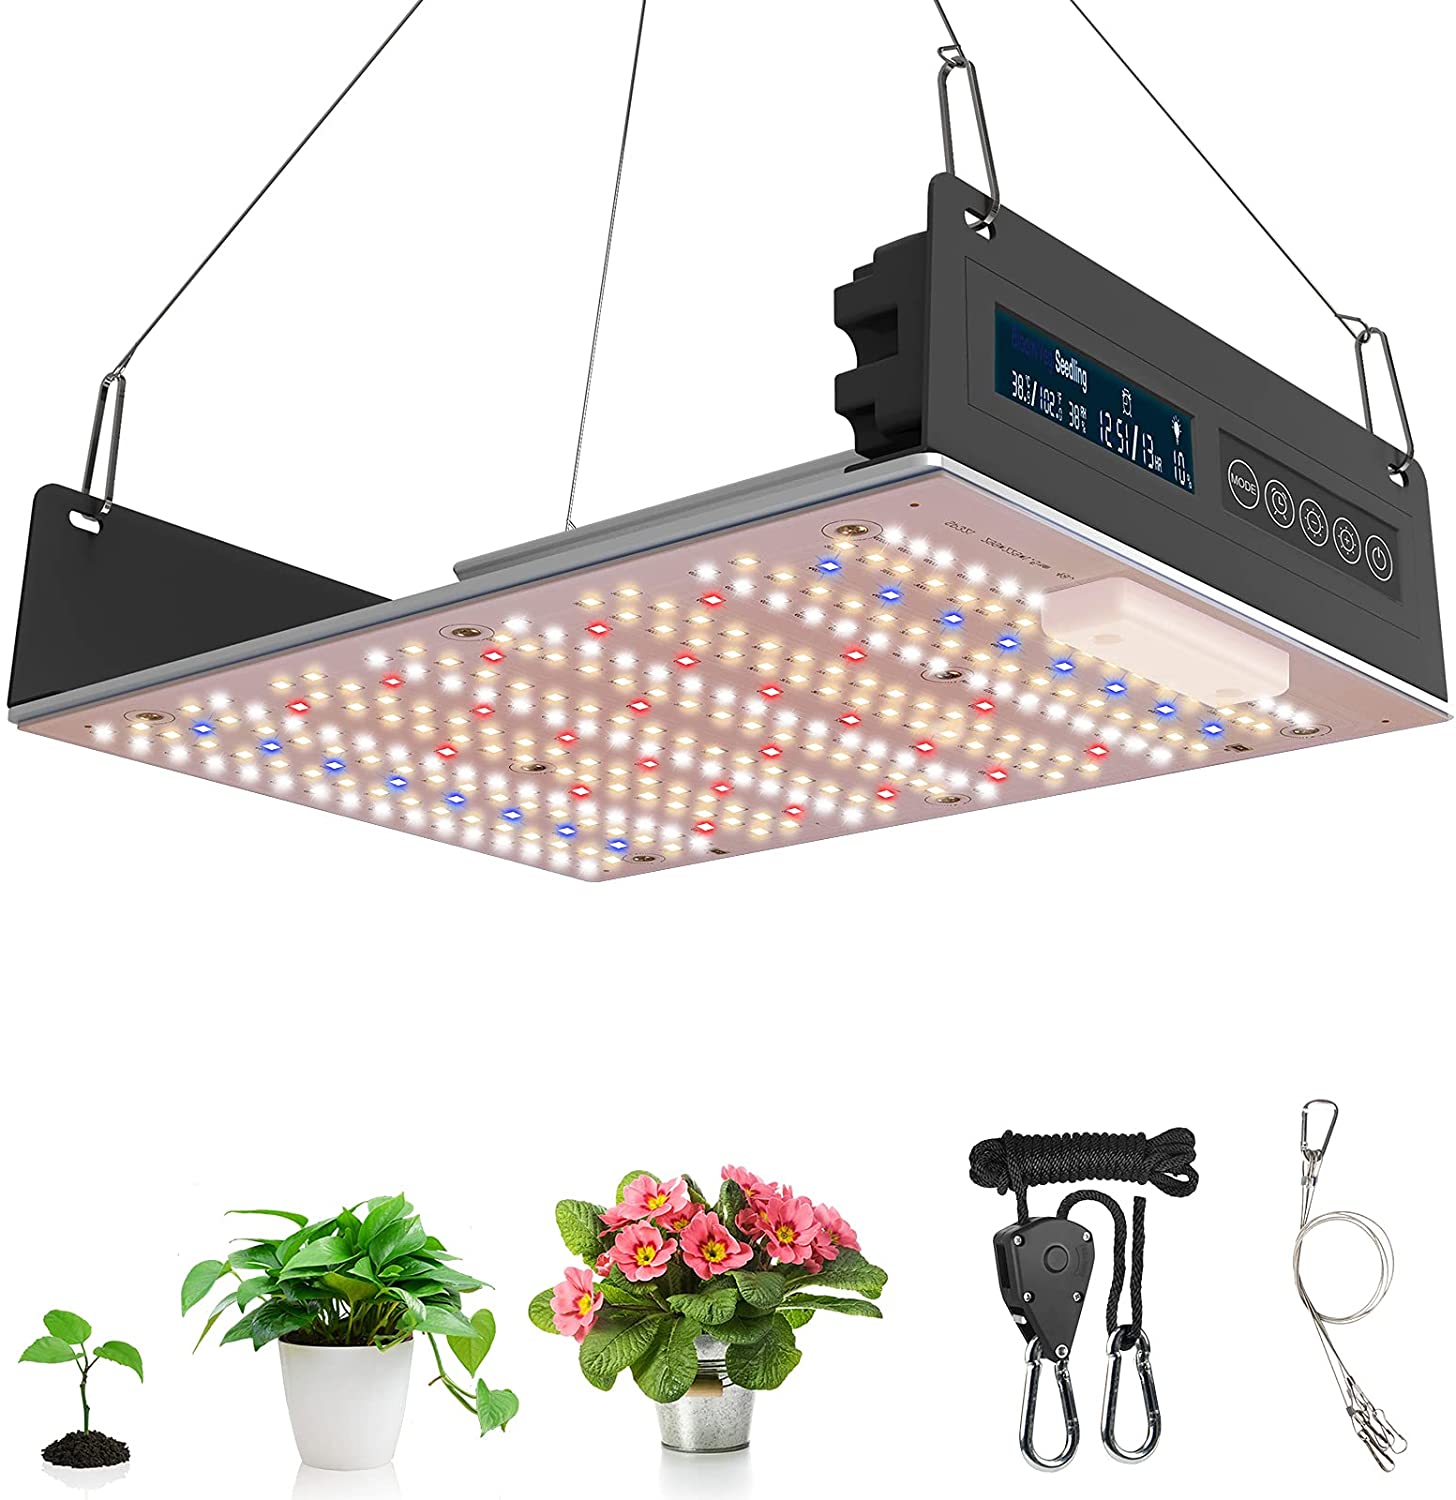 LED commercial grow light 150W for indoor plants